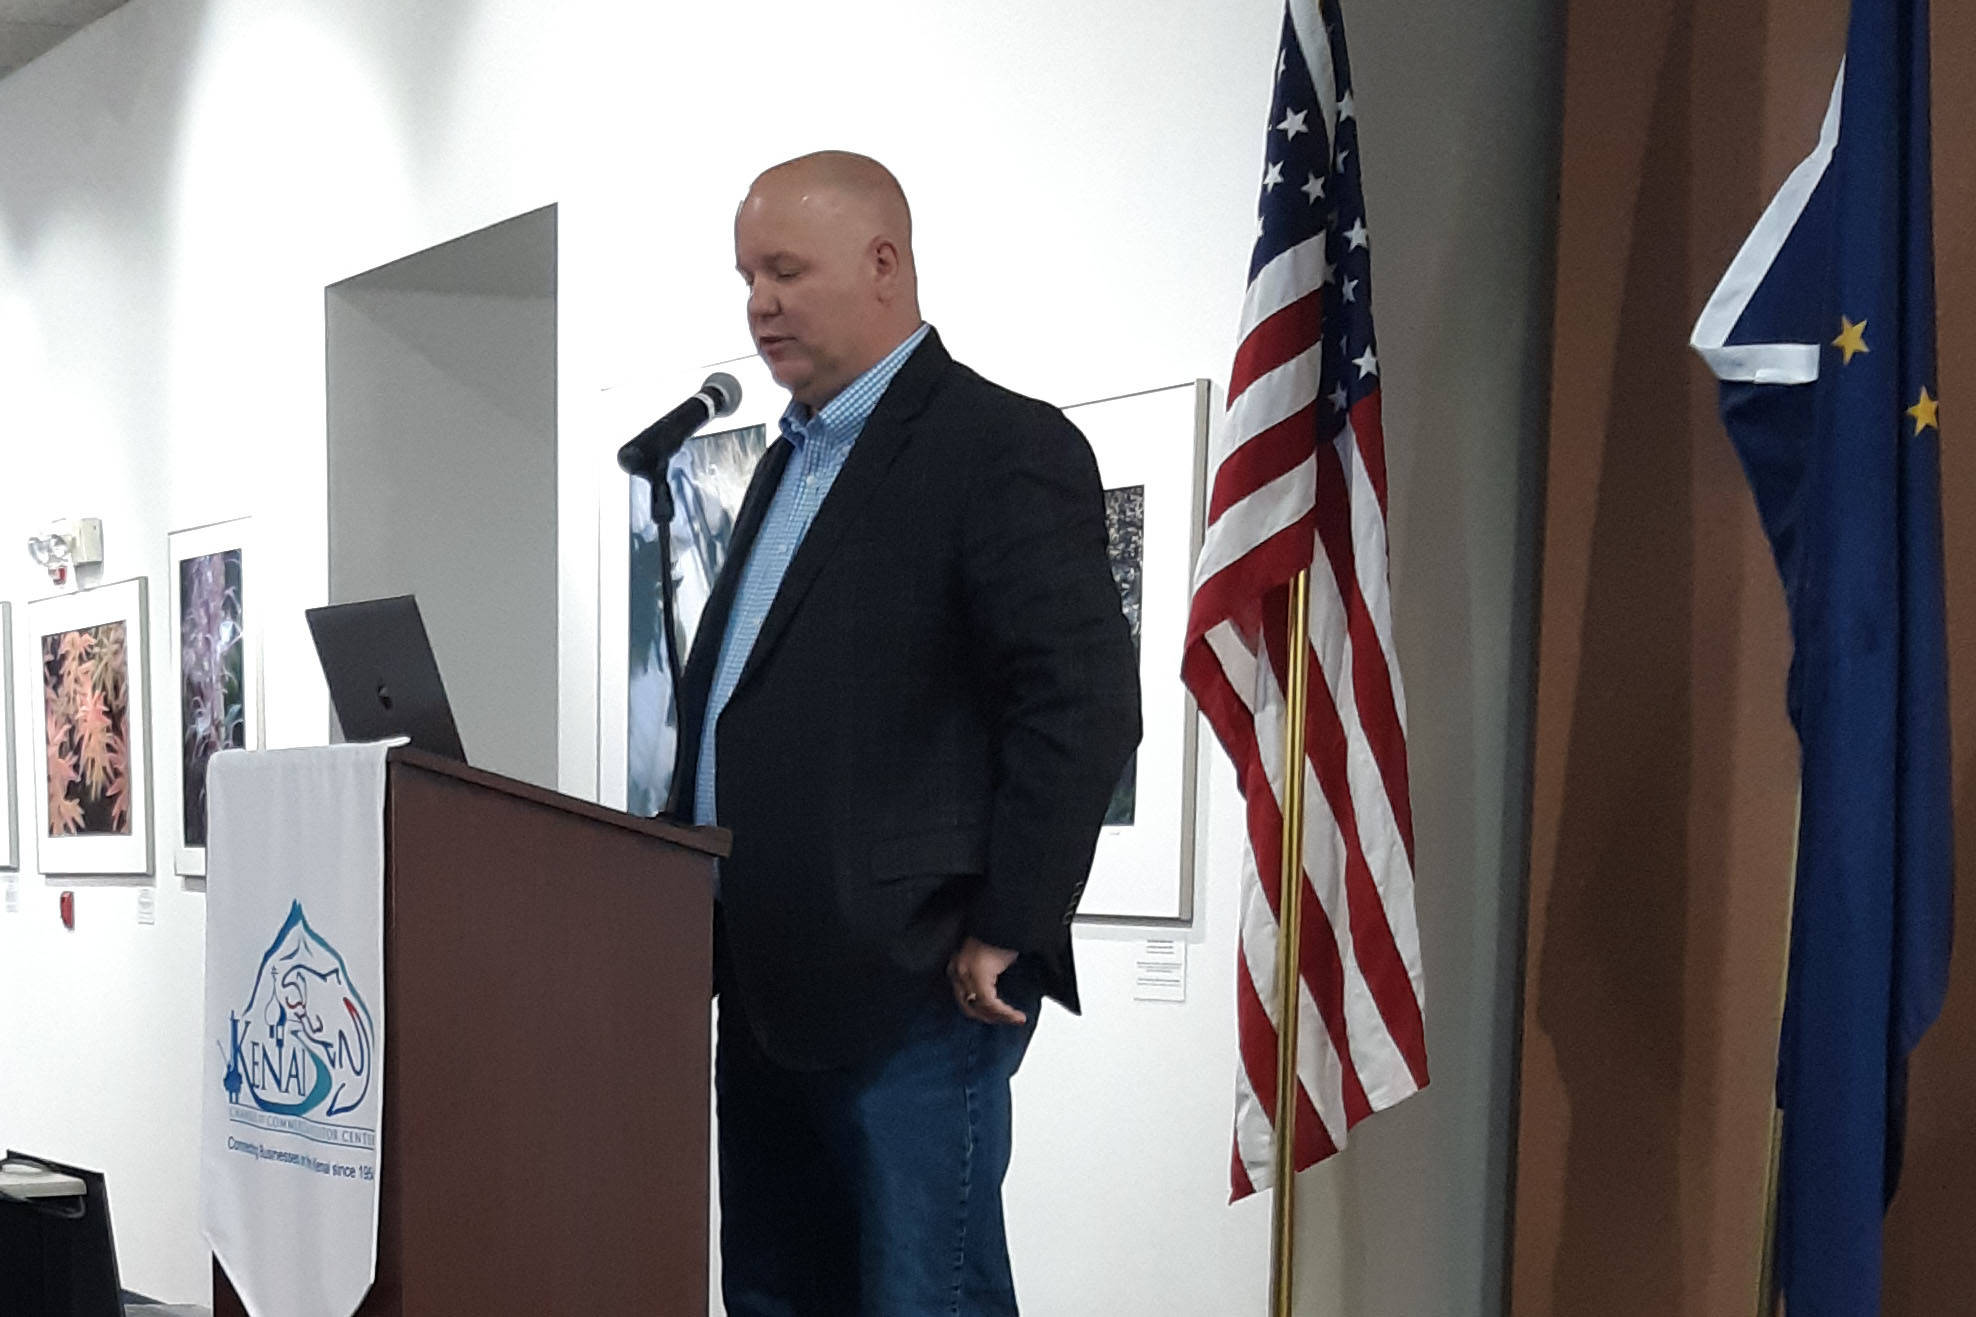 Rick Whitbeck, State Director for Power the Future, gives a presentation to the Joint Kenai/Soldotna Chambers of Commerce in Kenai, Alaska on Wednesday, June 5, 2019. (Photo by Brian Mazurek/Peninsula Clarion)